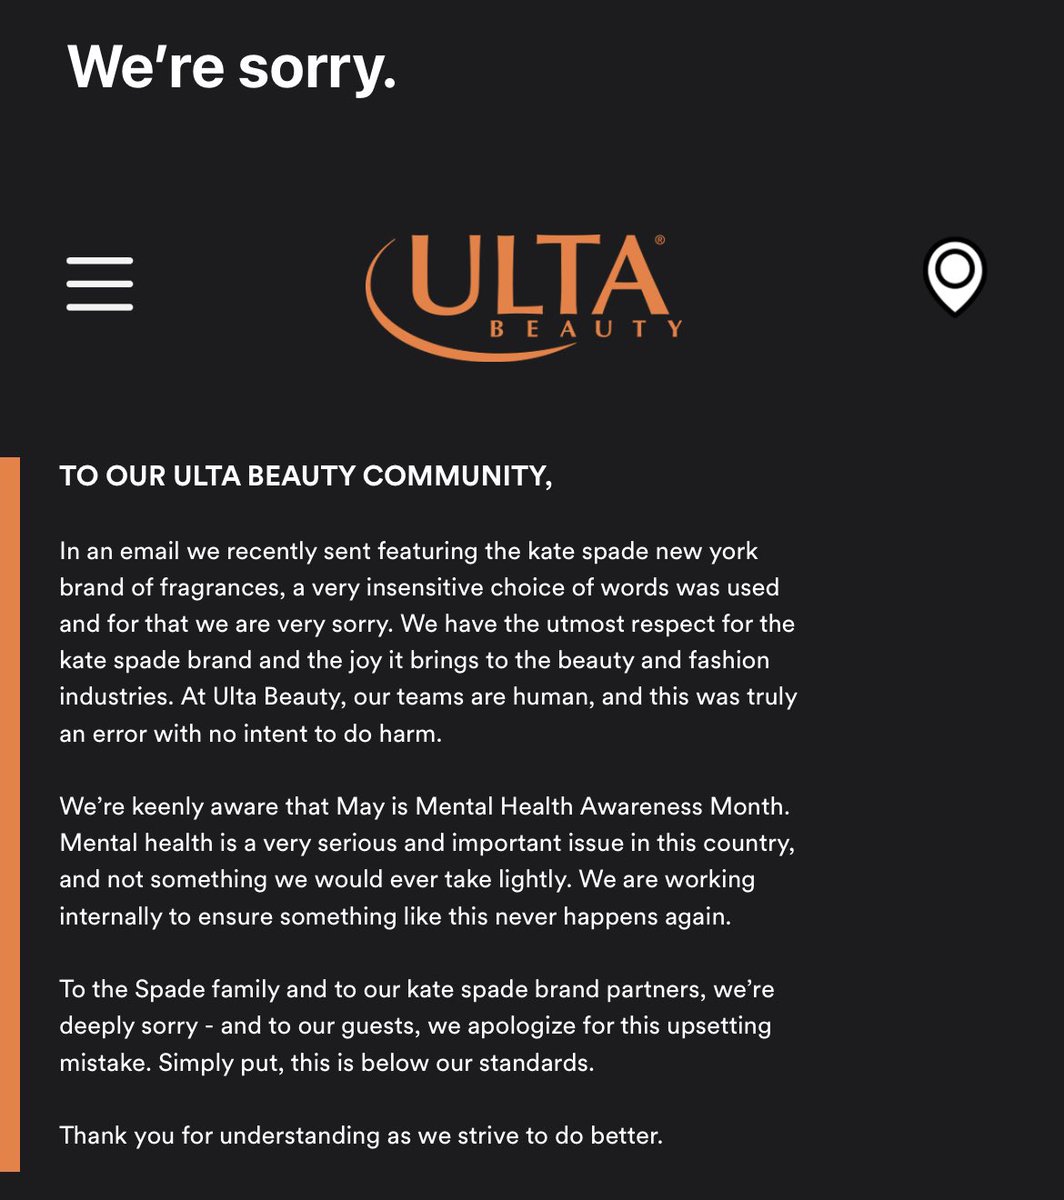 Ulta Beauty Apologizes for Insensitive Ad